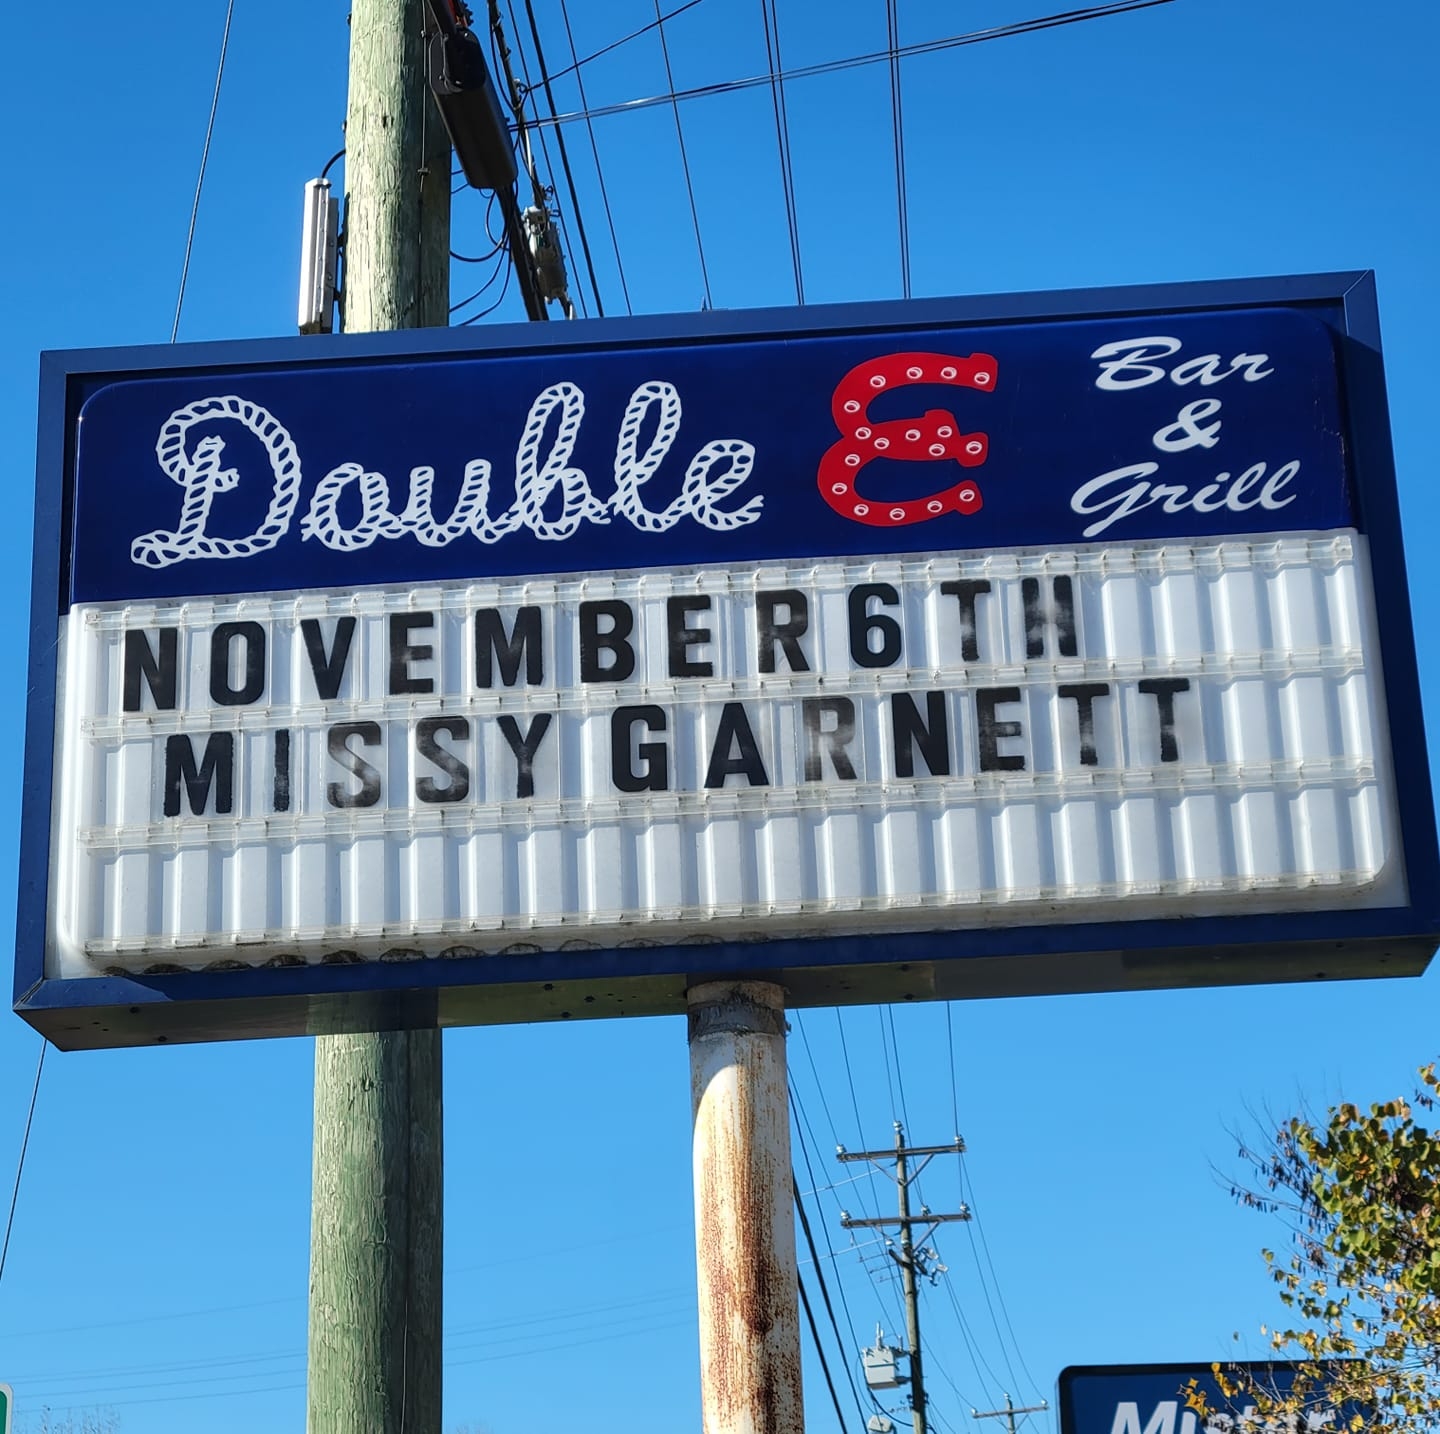 Double E's Bar and Grill